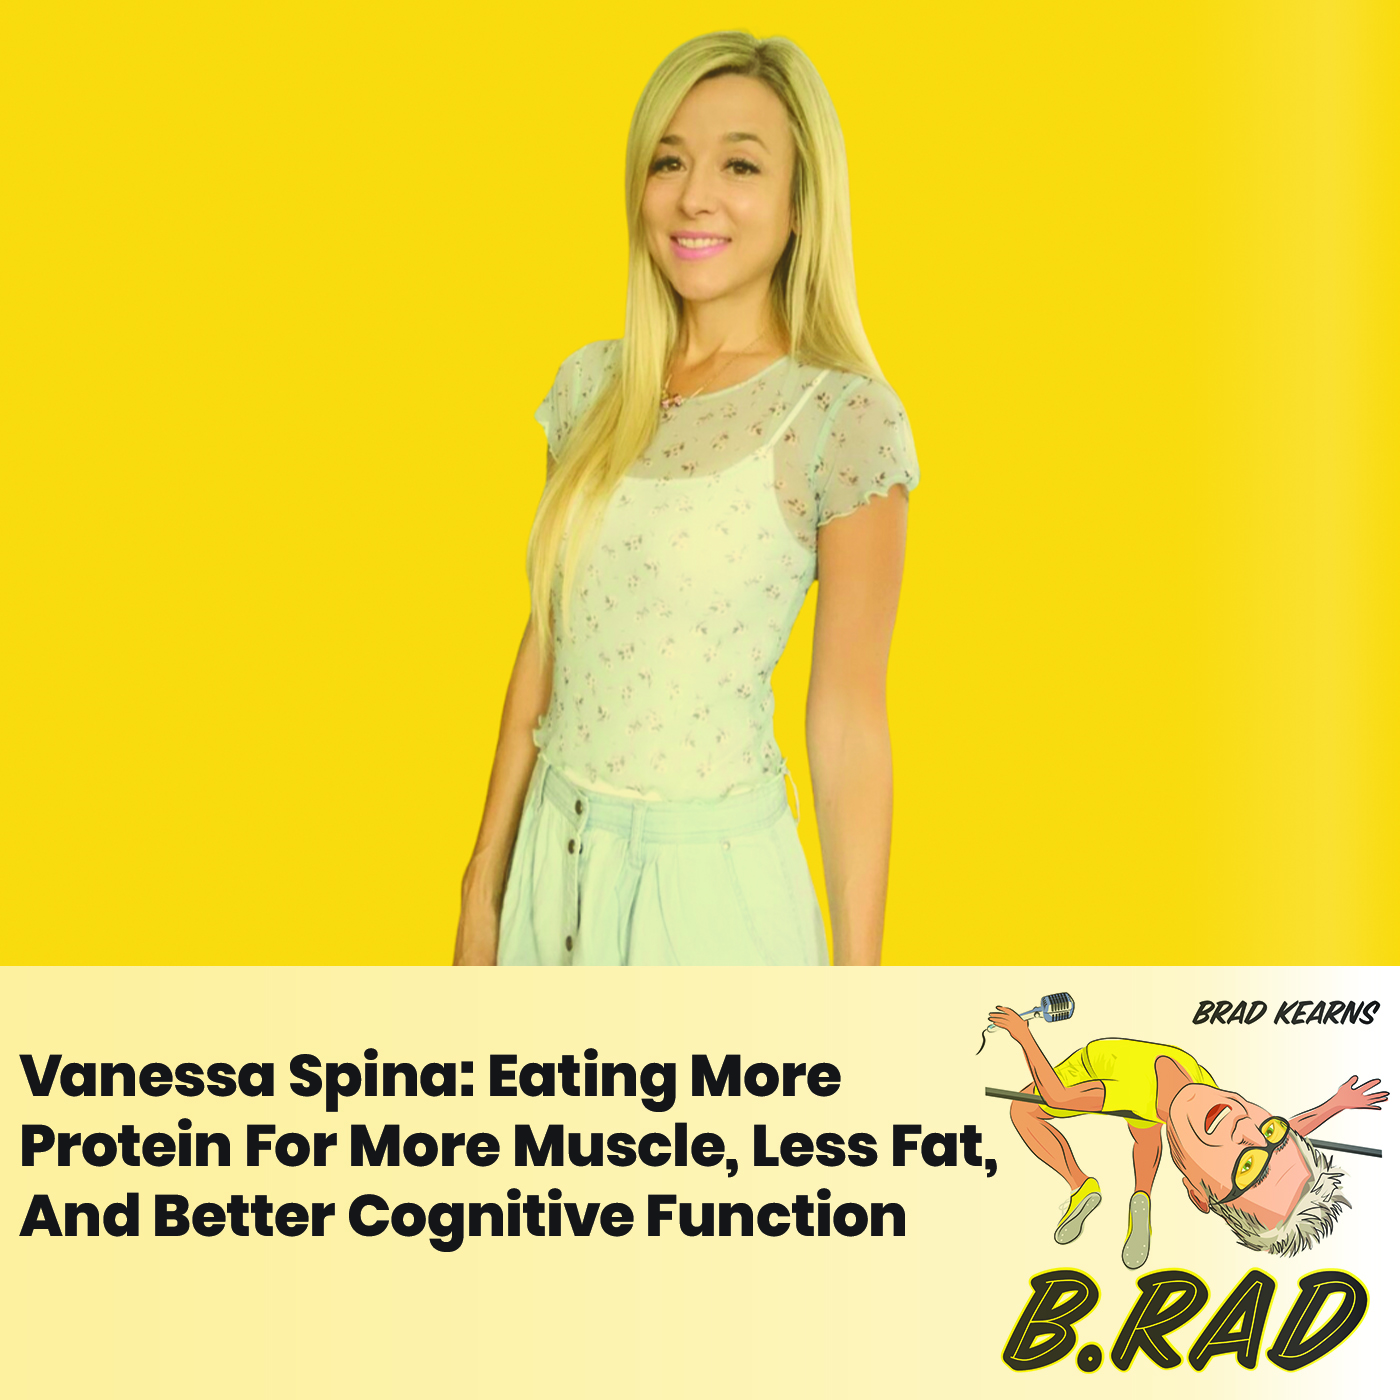 Vanessa Spina: Eating More Protein For More Muscle, Less Fat, And Better Cognitive Function